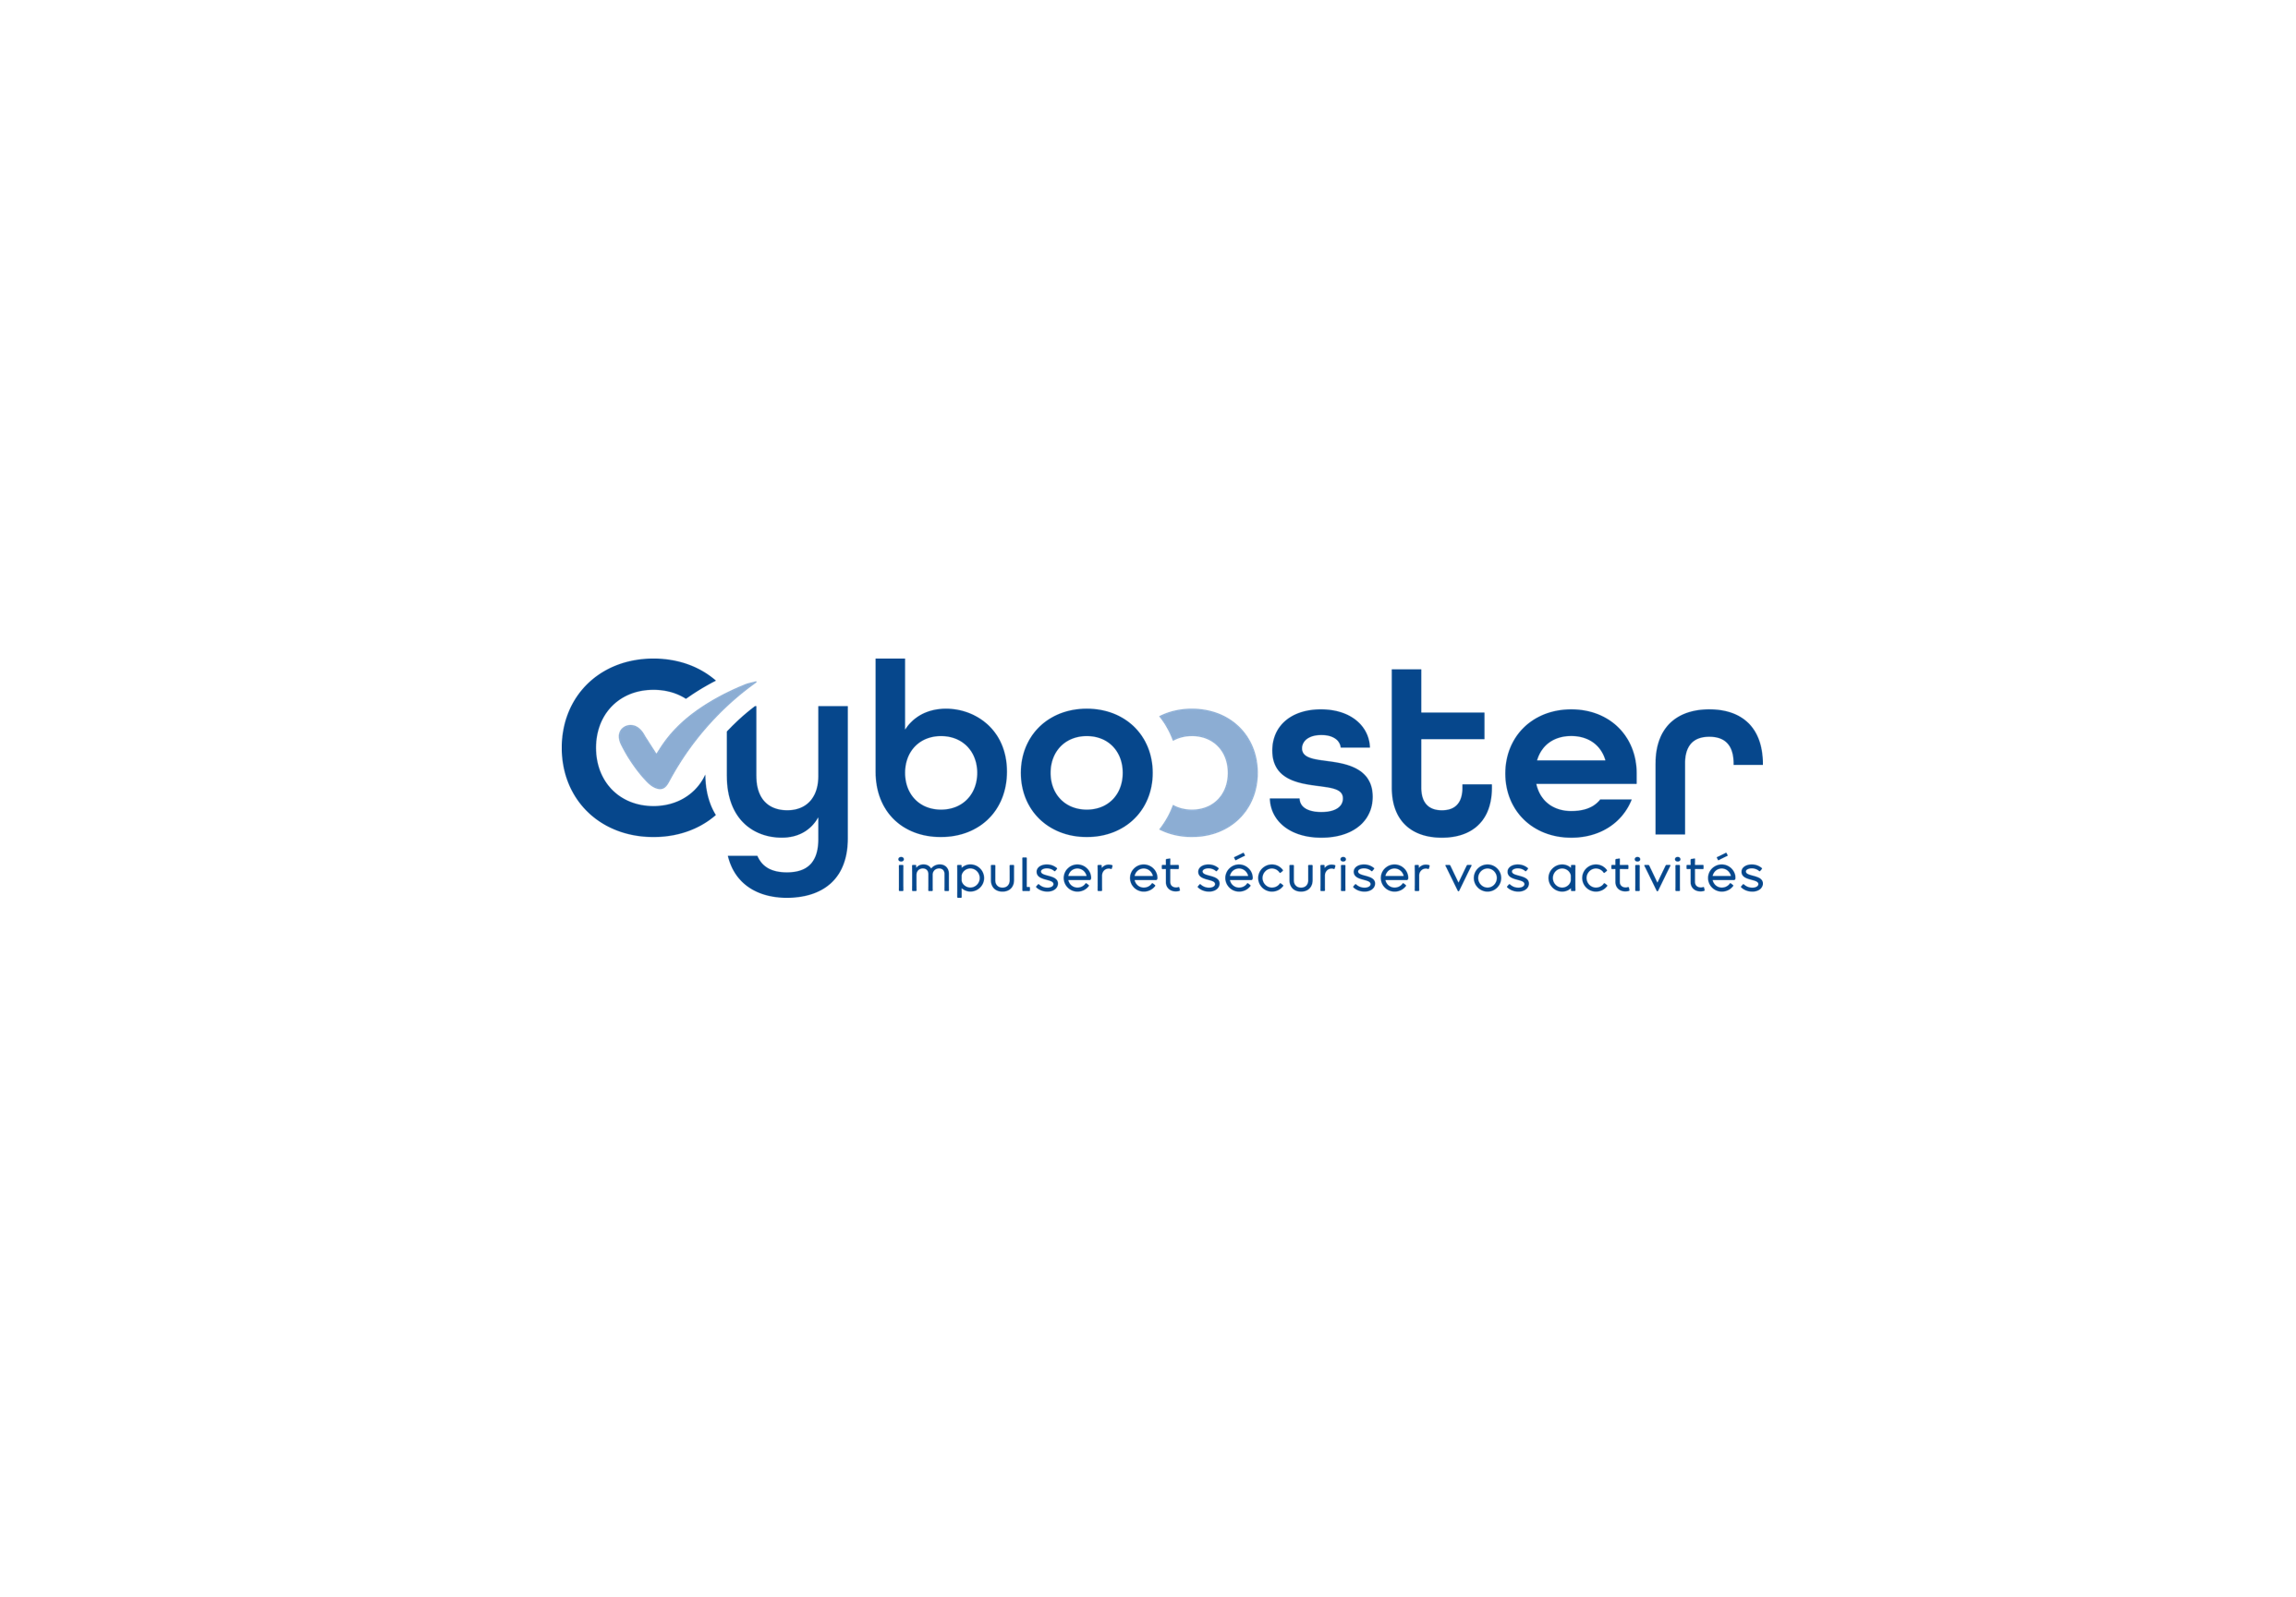 Cyberbooster